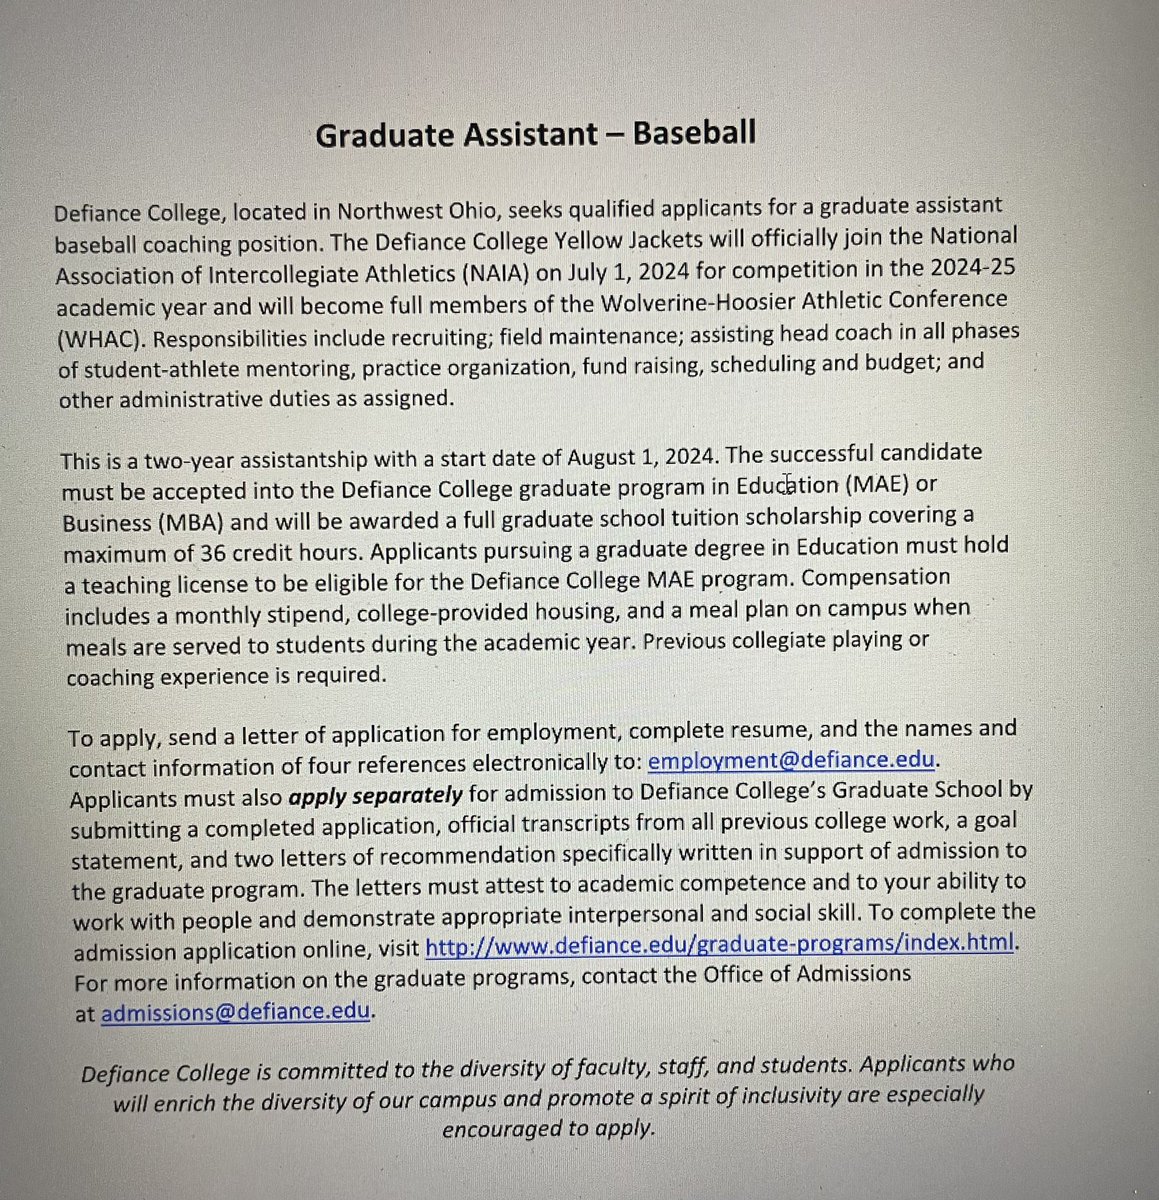 Our program is looking for a grad assistant! Looking for someone who is motivated and energetic! @NAIABall @SkippersDugout @ABCA1945 @TheCoachJournal